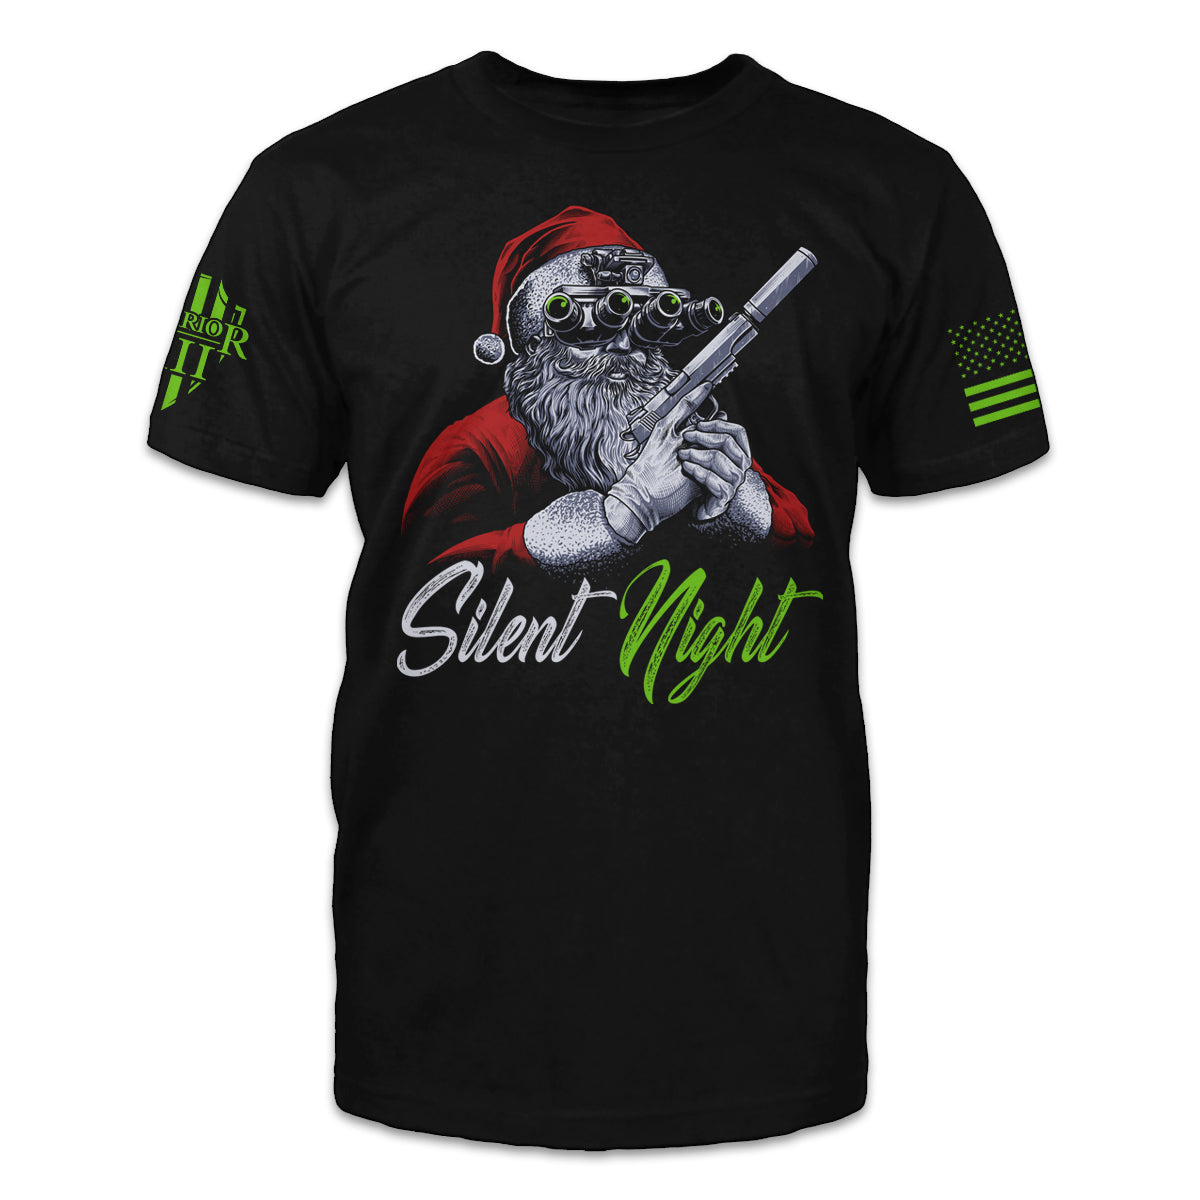 A black t-shirt with an image on the front of Santa Claus wearing night vision goggles and holding a pistol with a silencer on it above the words "Silent Night".